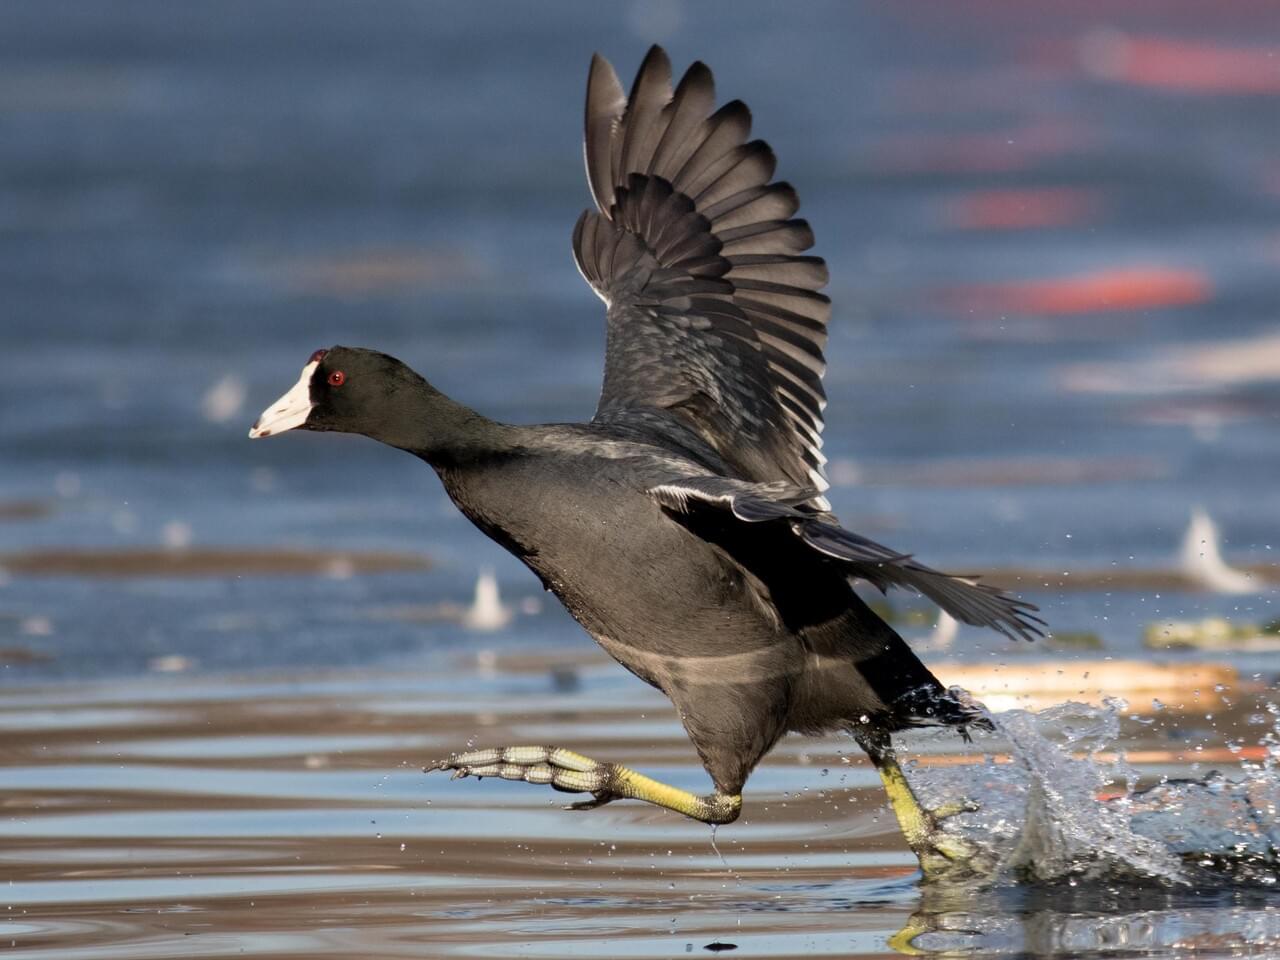 This picture is from the Cornell University "All About Birds" website